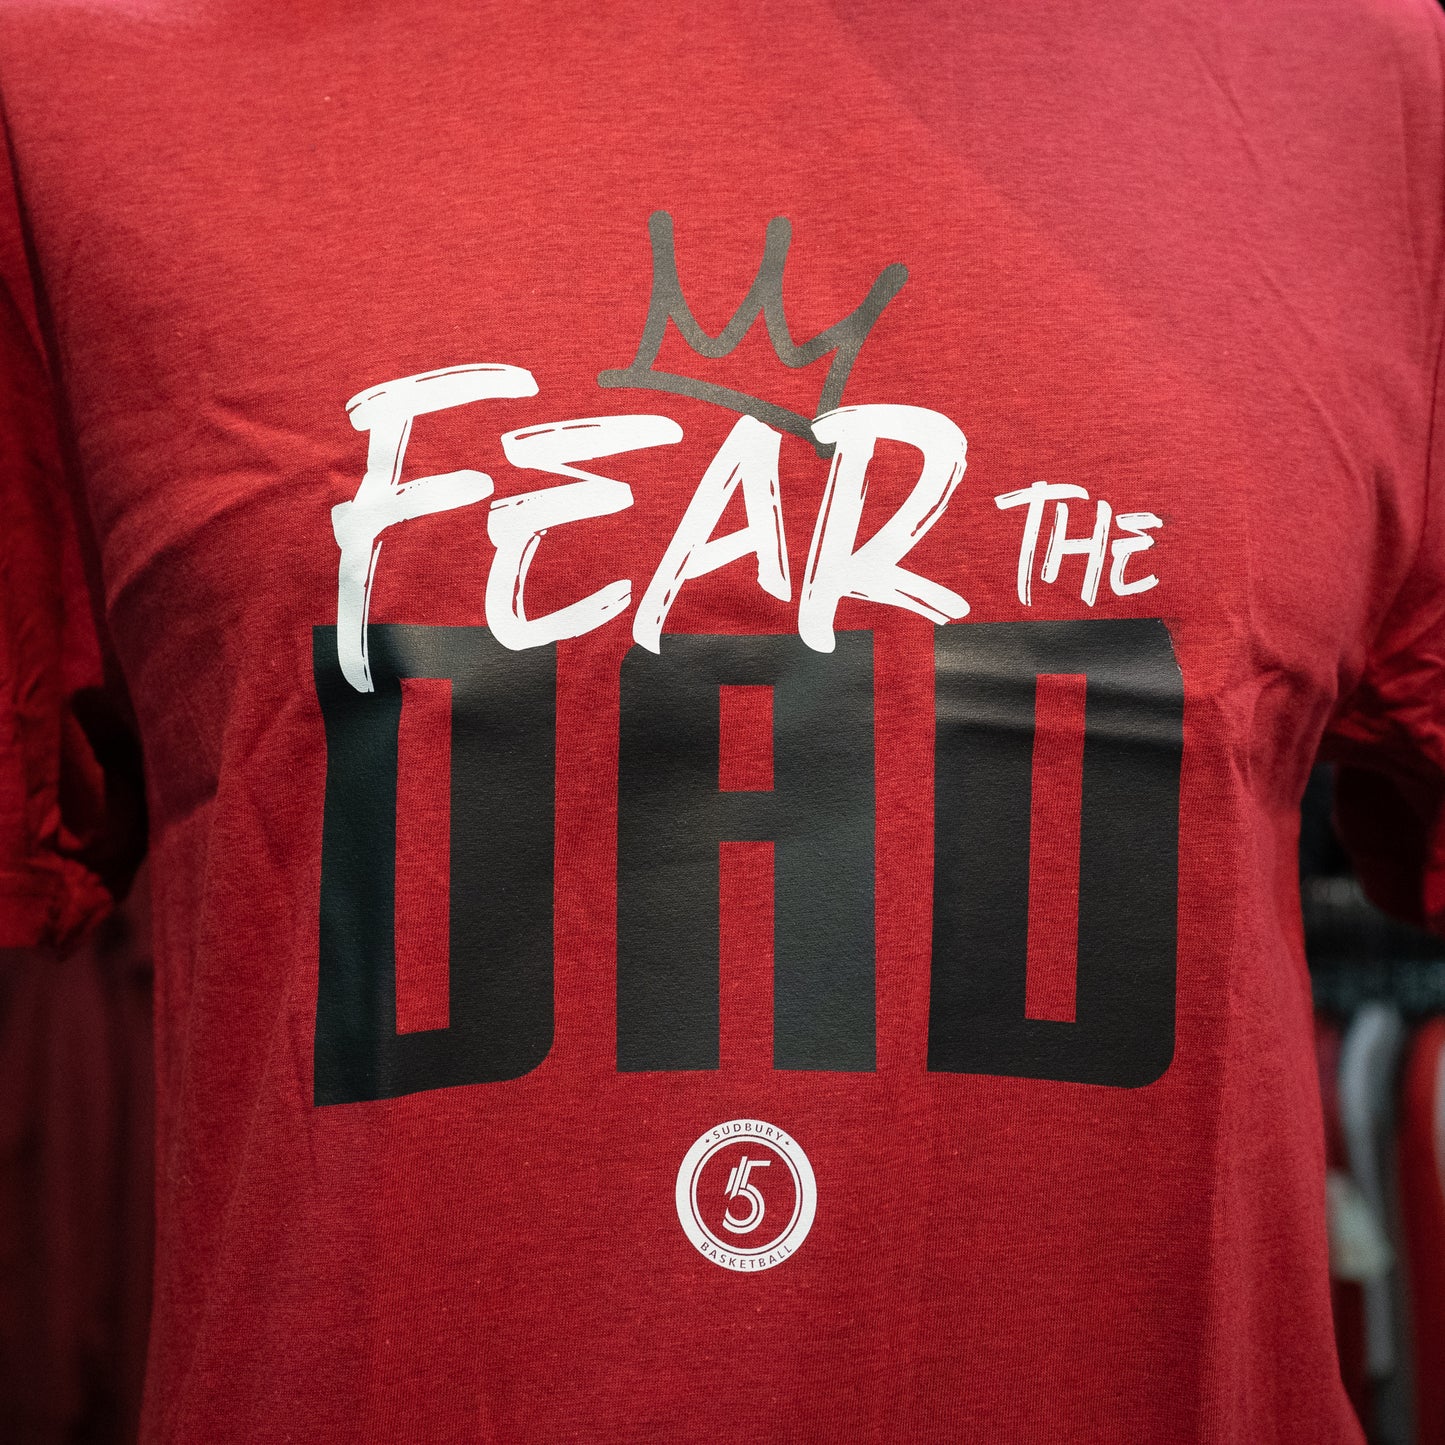 Five Father's Day Tee